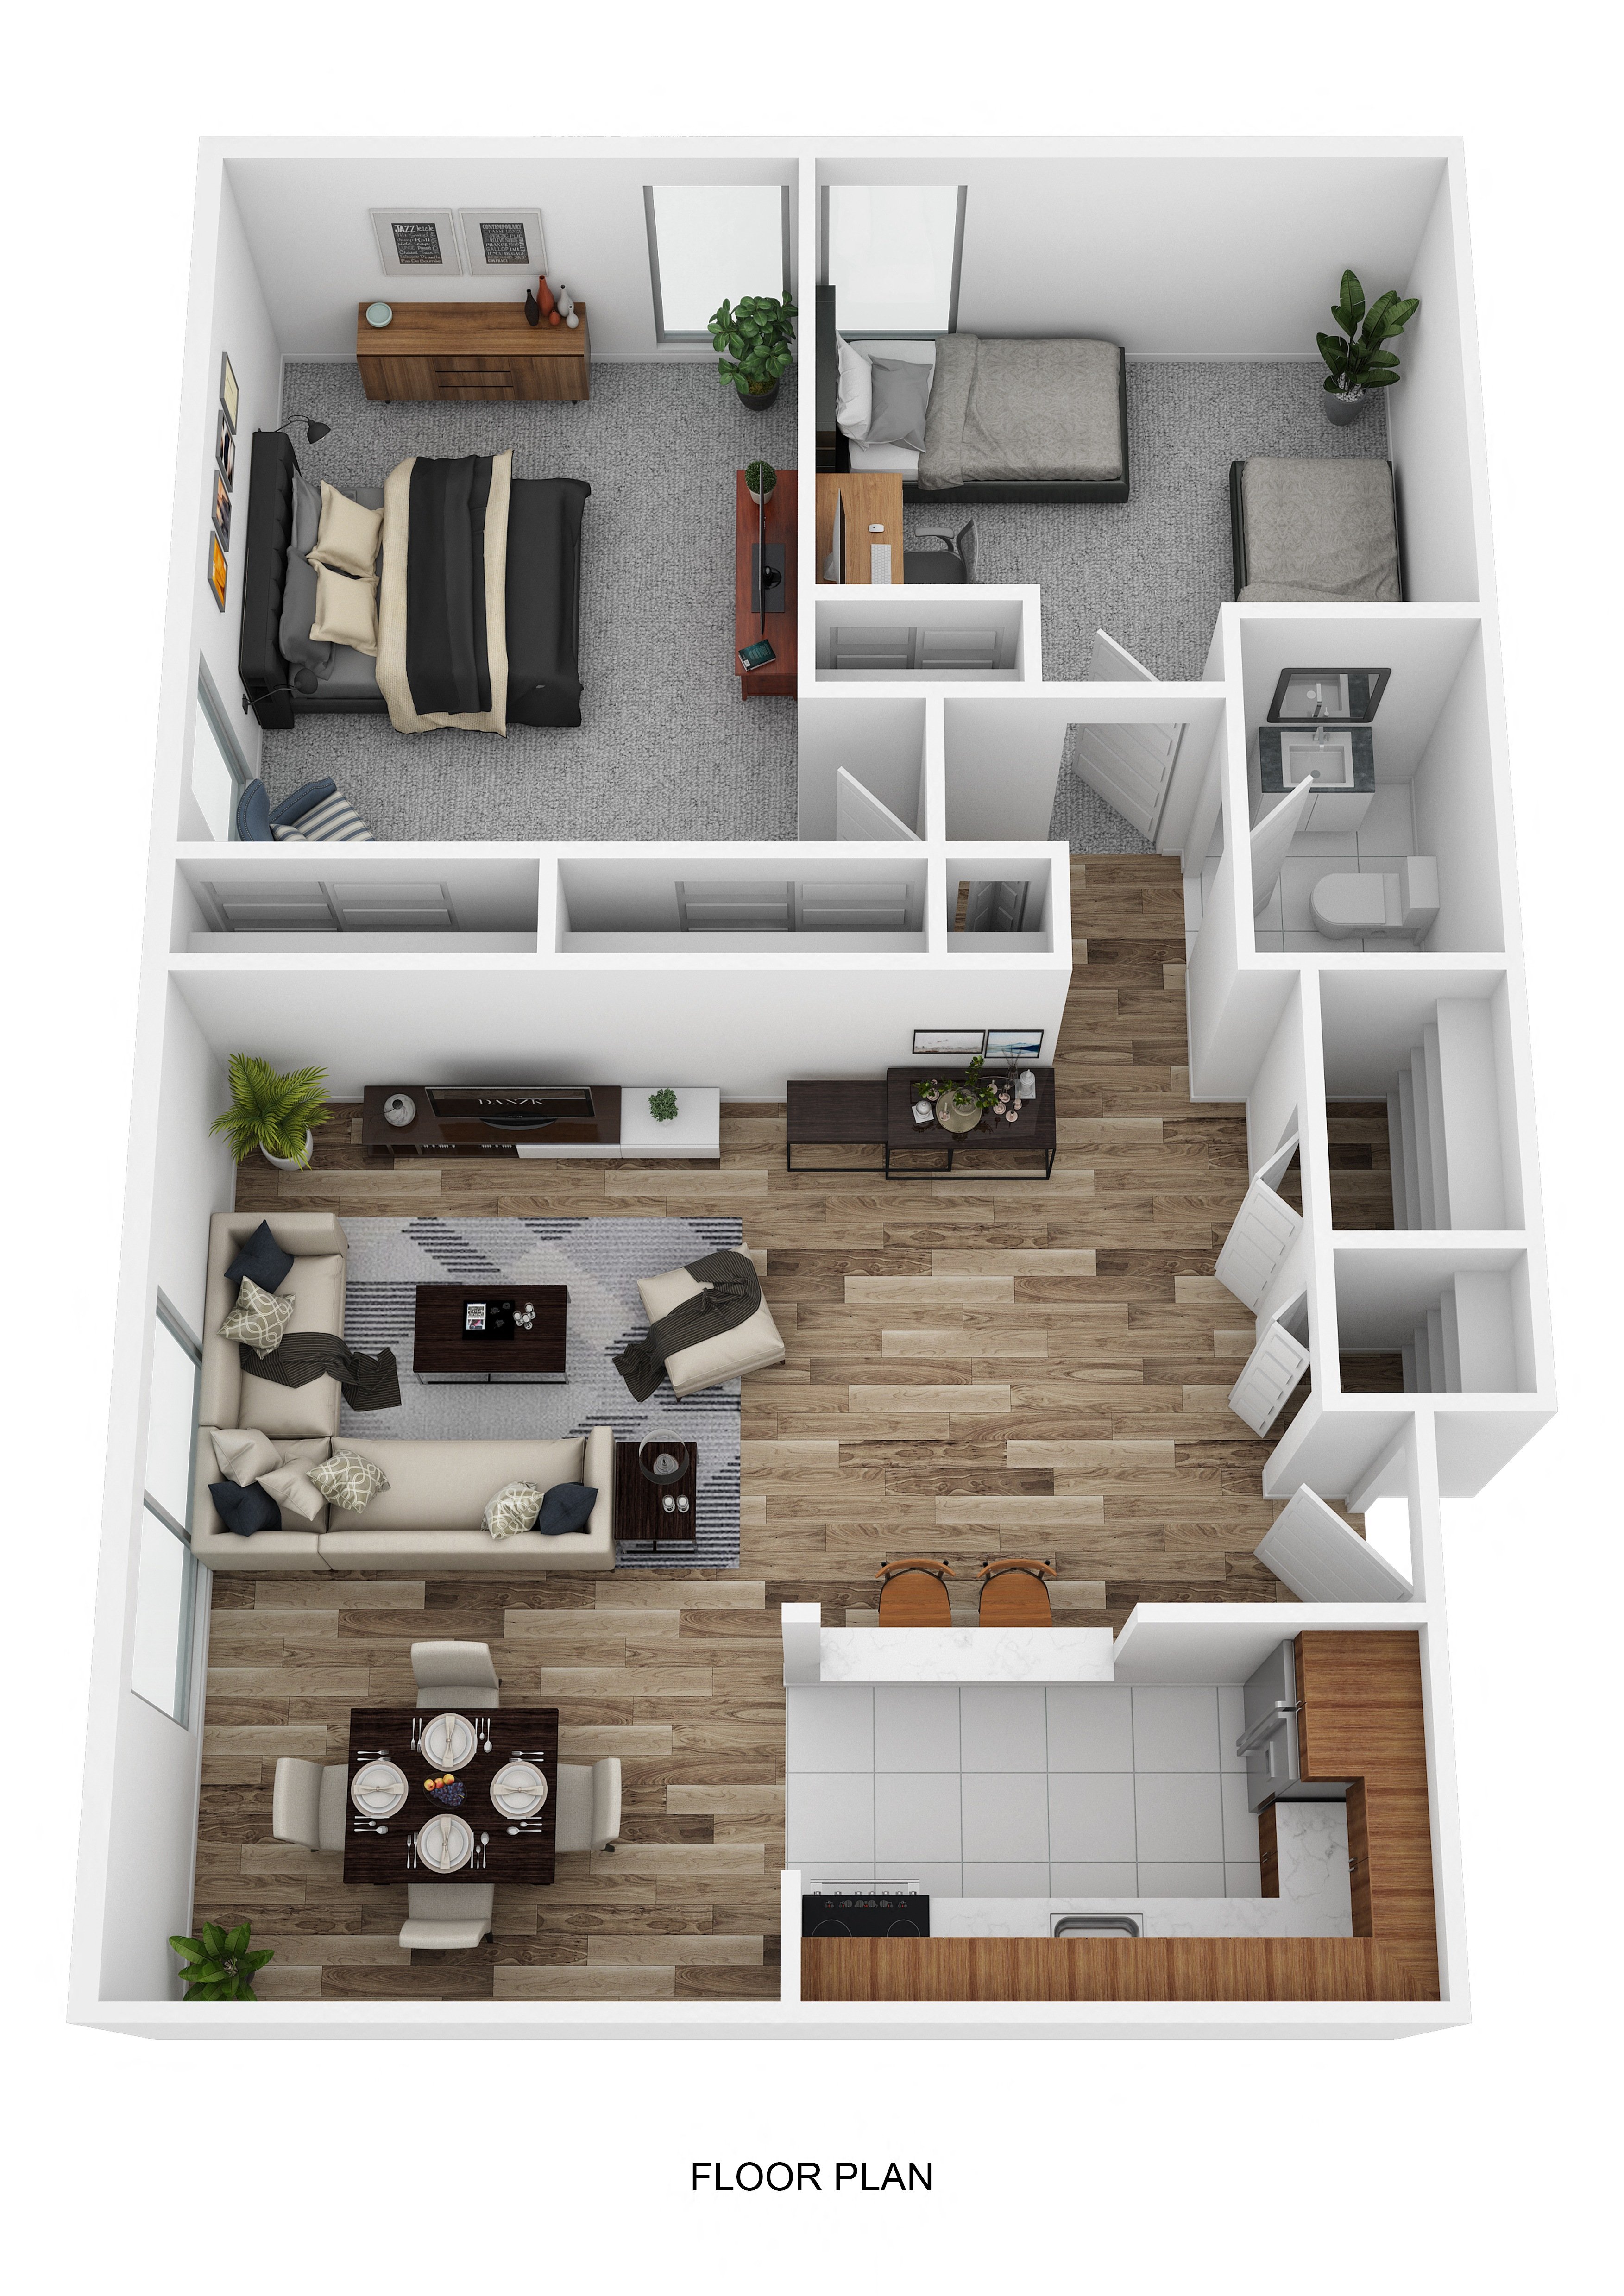 1,150 square foot apartment with a balcony, two bedrooms and one bathroom.,1,150 square foot apartment with a balcony, two bedrooms and one bathroom.